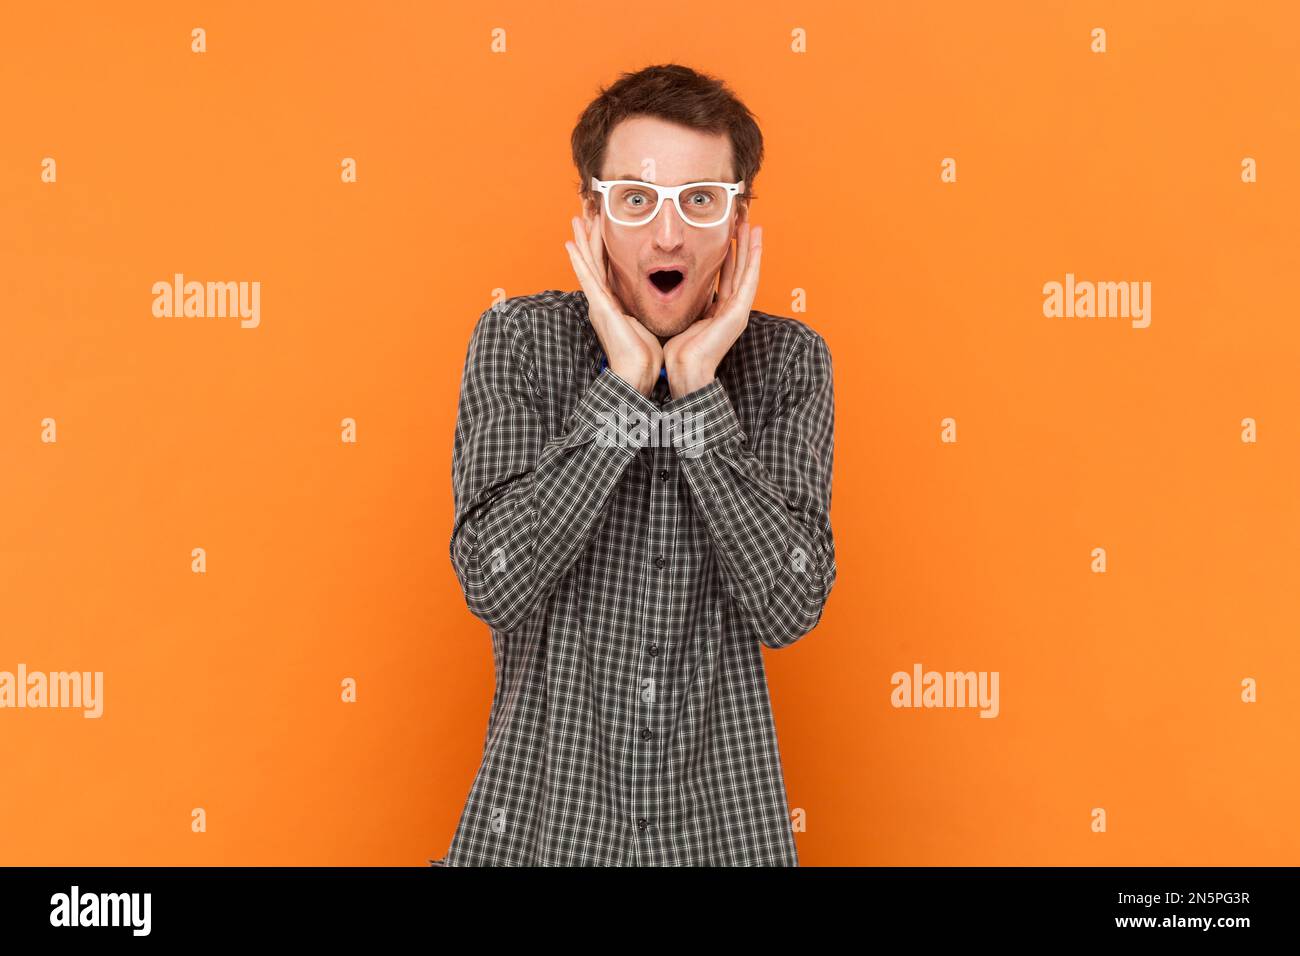 Amazed man nerd doesnt believe his success, keeps hands on head, stares at camera, says omg or wow, wearing shirt with blue bow tie and white glasses. Indoor studio shot isolated on orange background Stock Photo